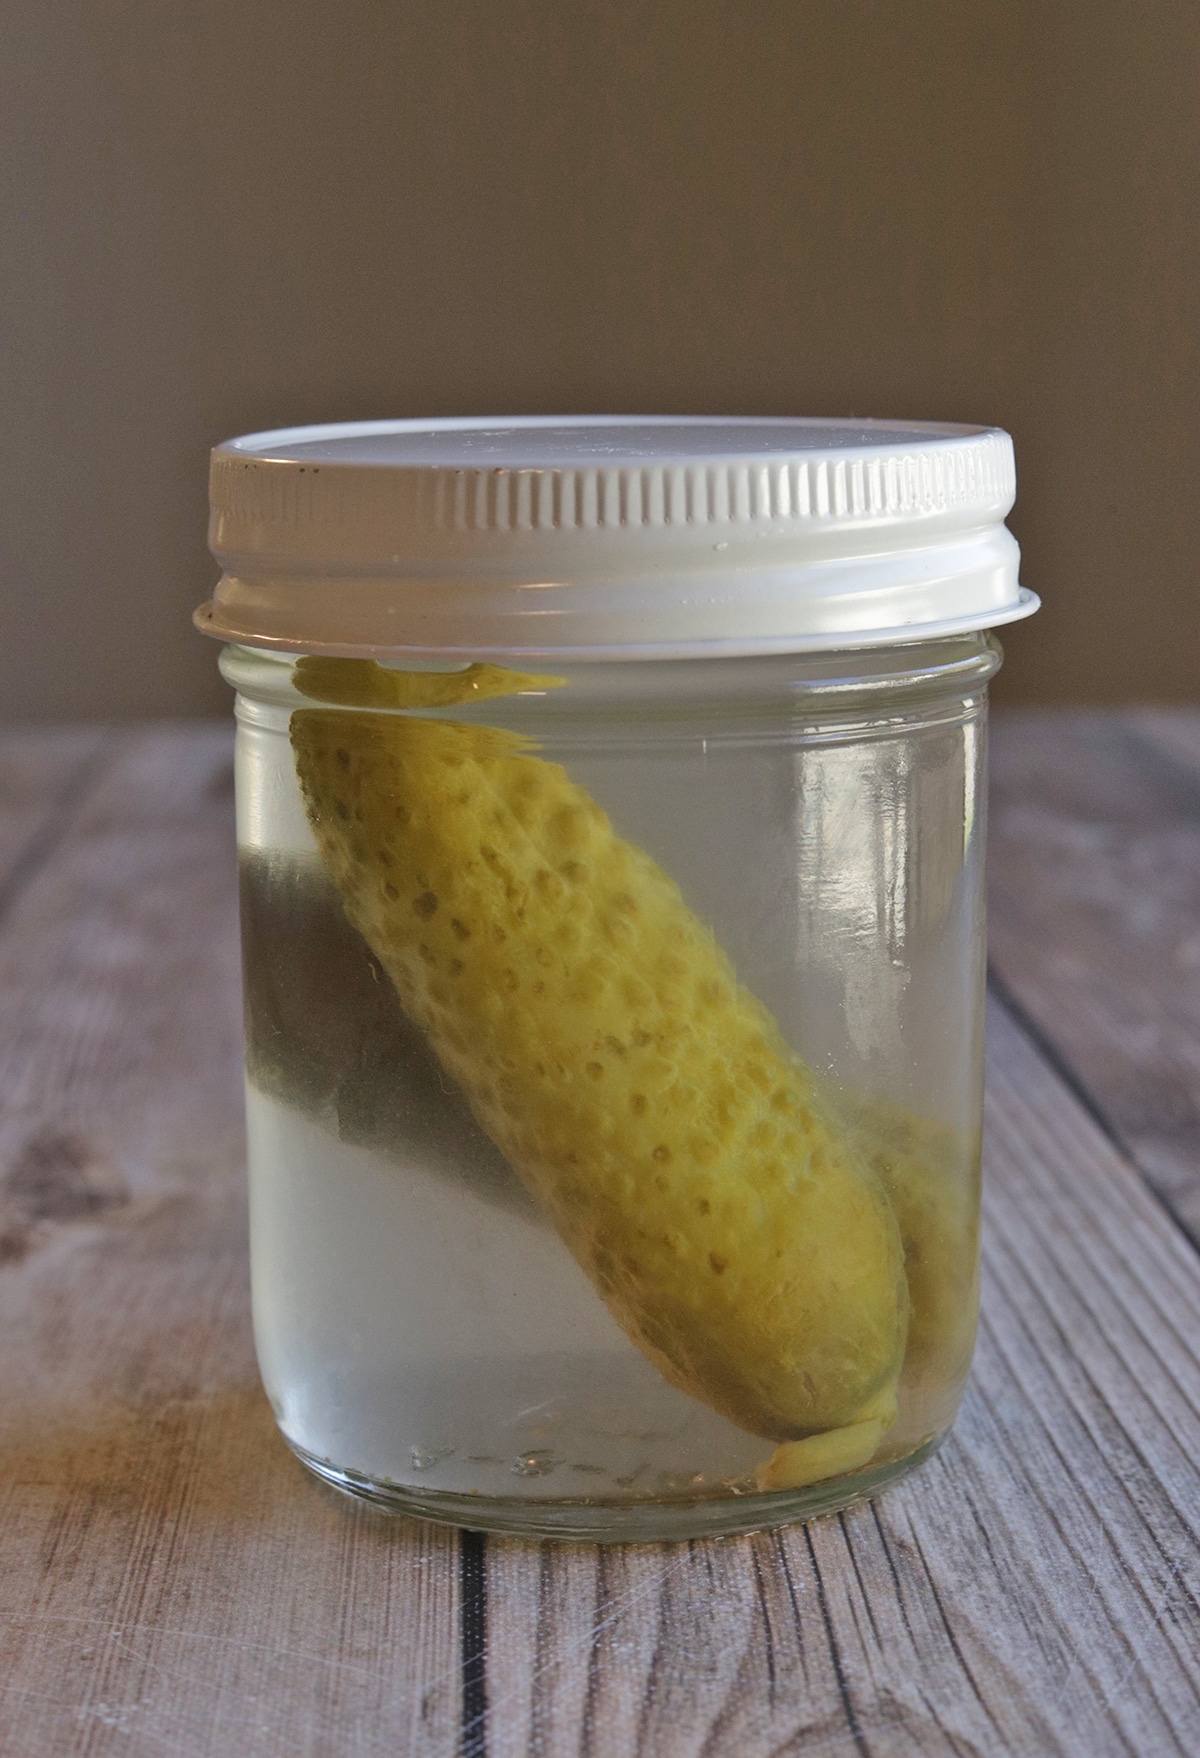 Two full sized pickles in jar with vodka and brine.